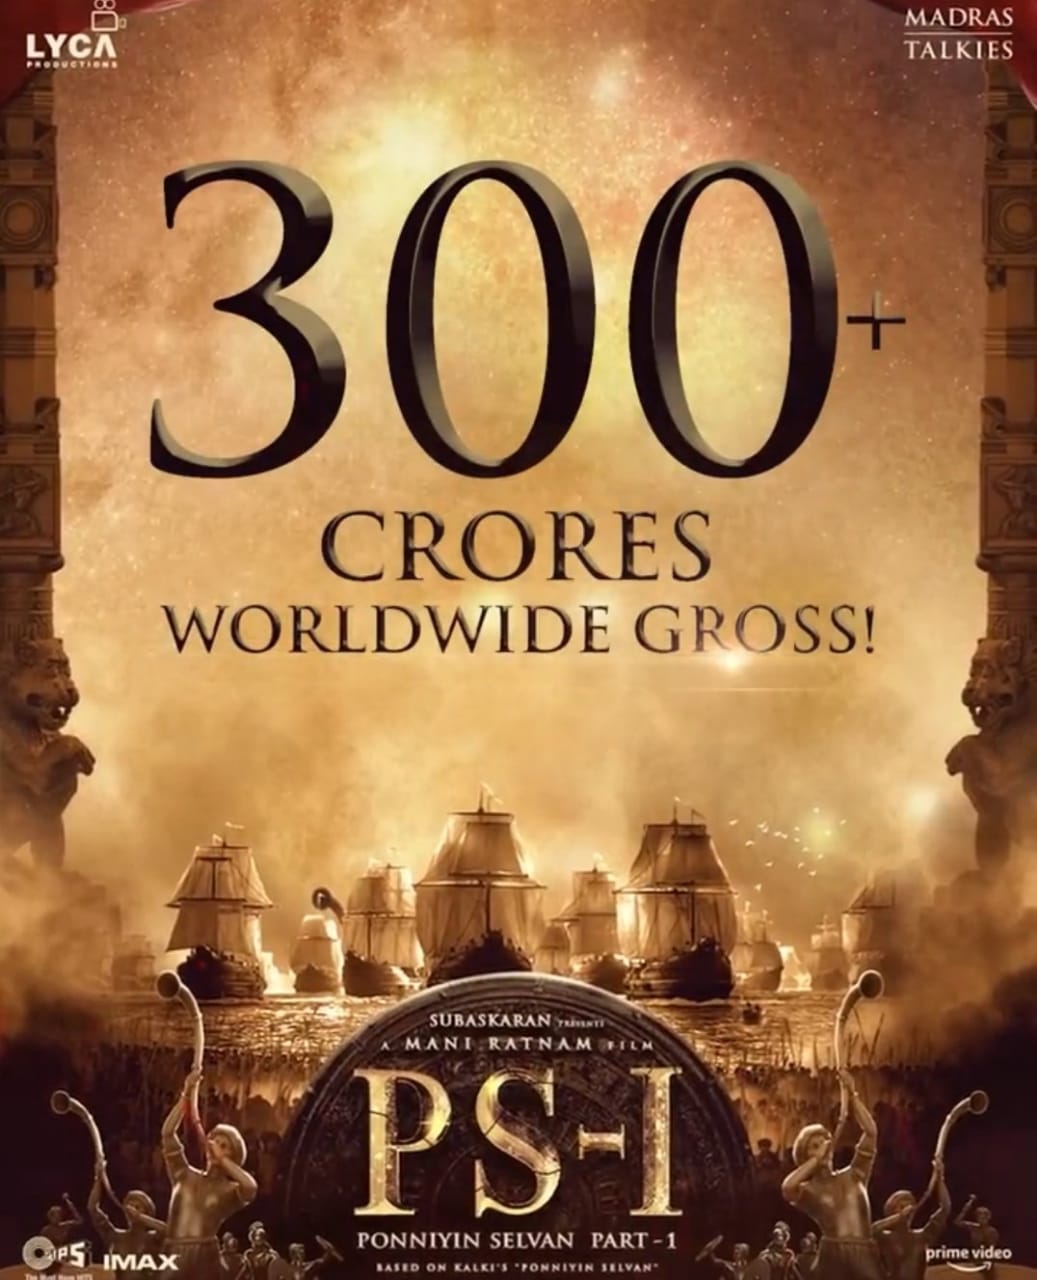 Ponniyin Selvan PS1 Crossed 300 Crore Box Office Collection